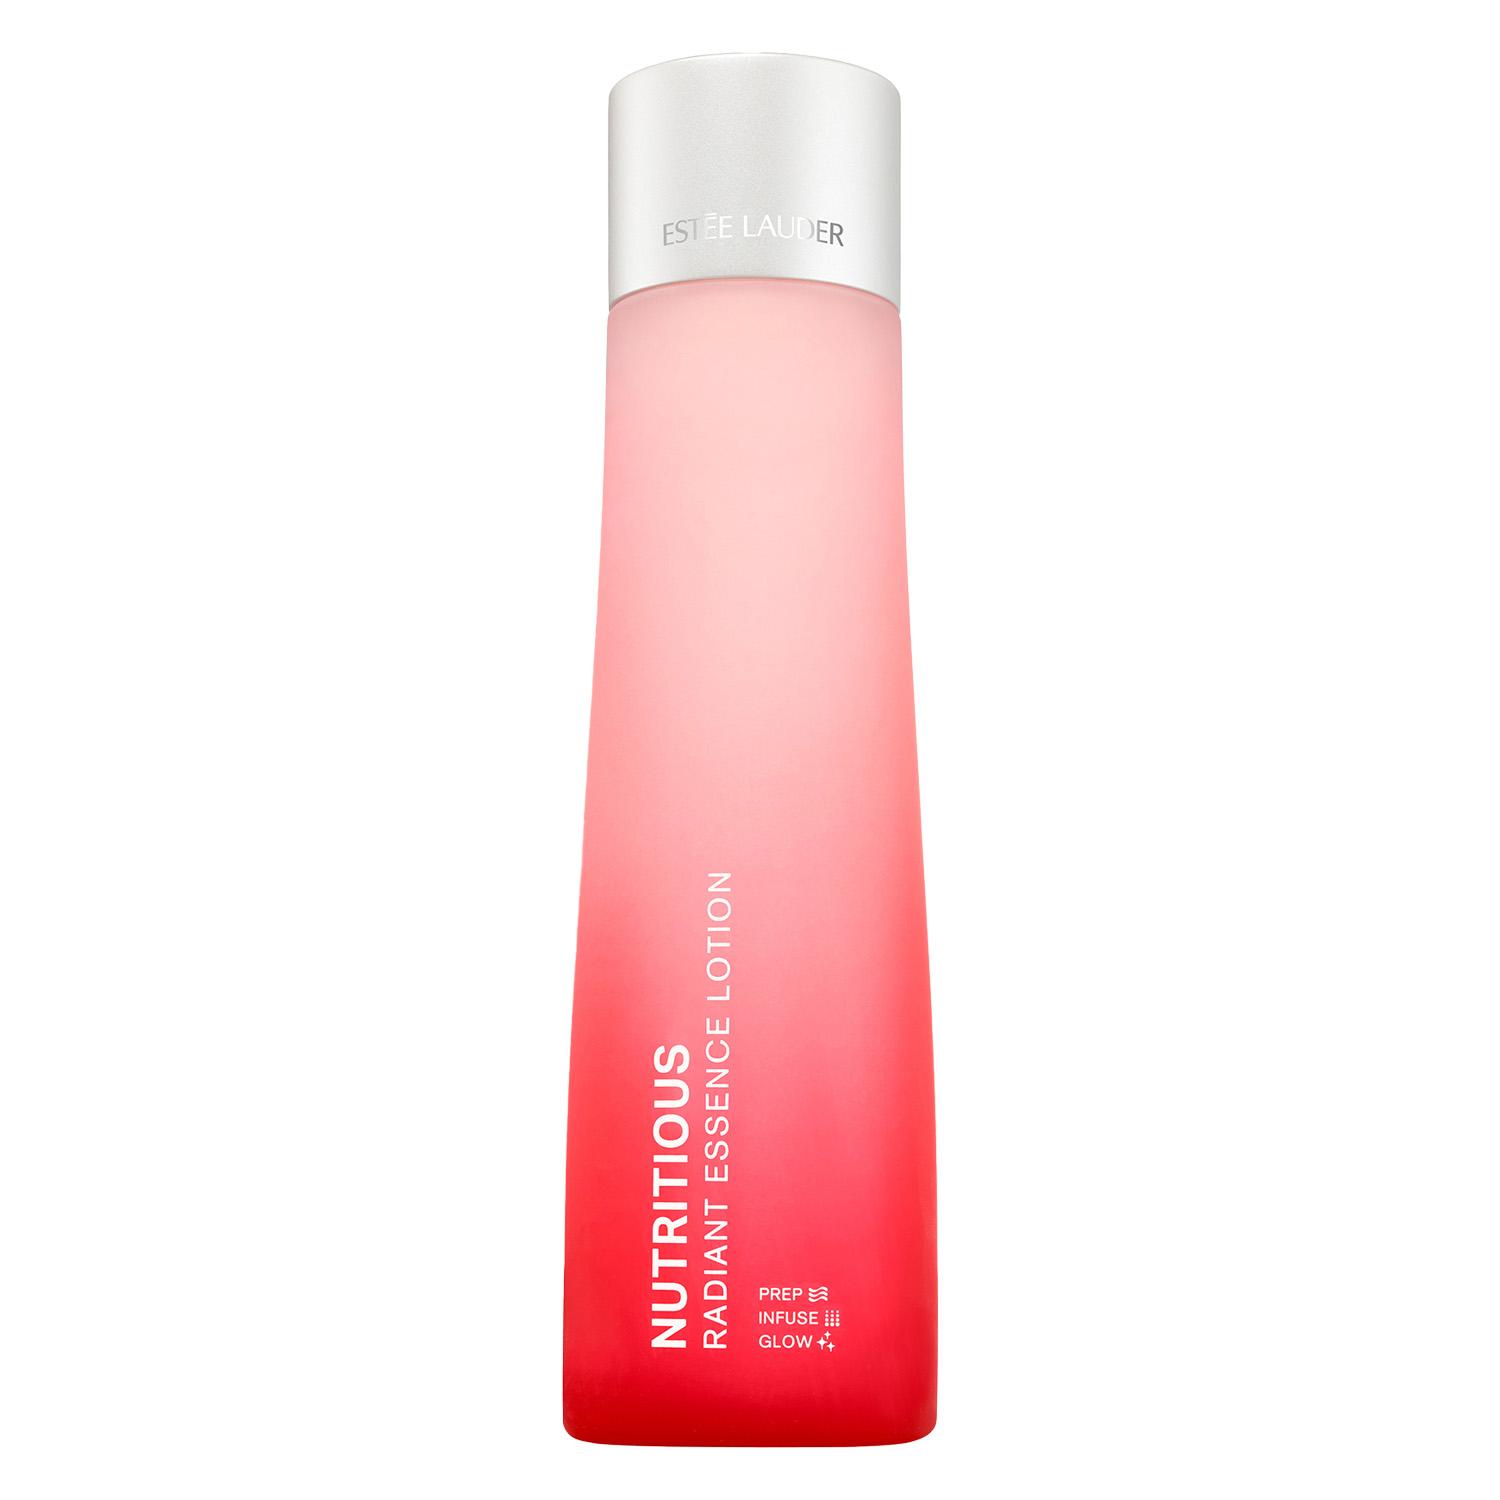 Nutritious - Radiant Essence Lotion